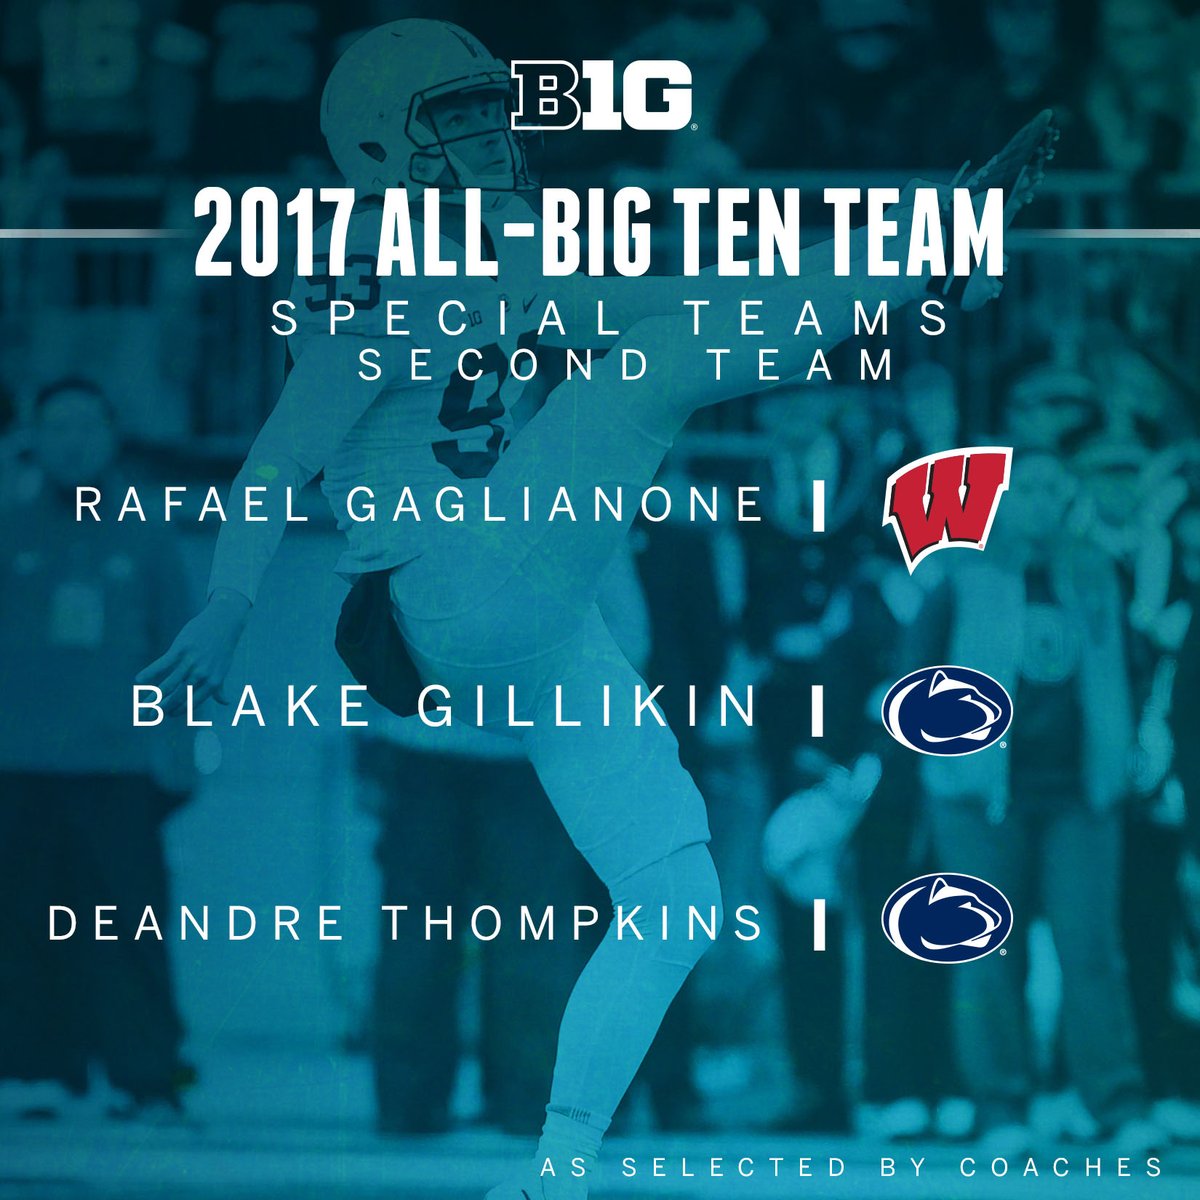 All-Big Ten Special Teams Second Team, as selected by coaches